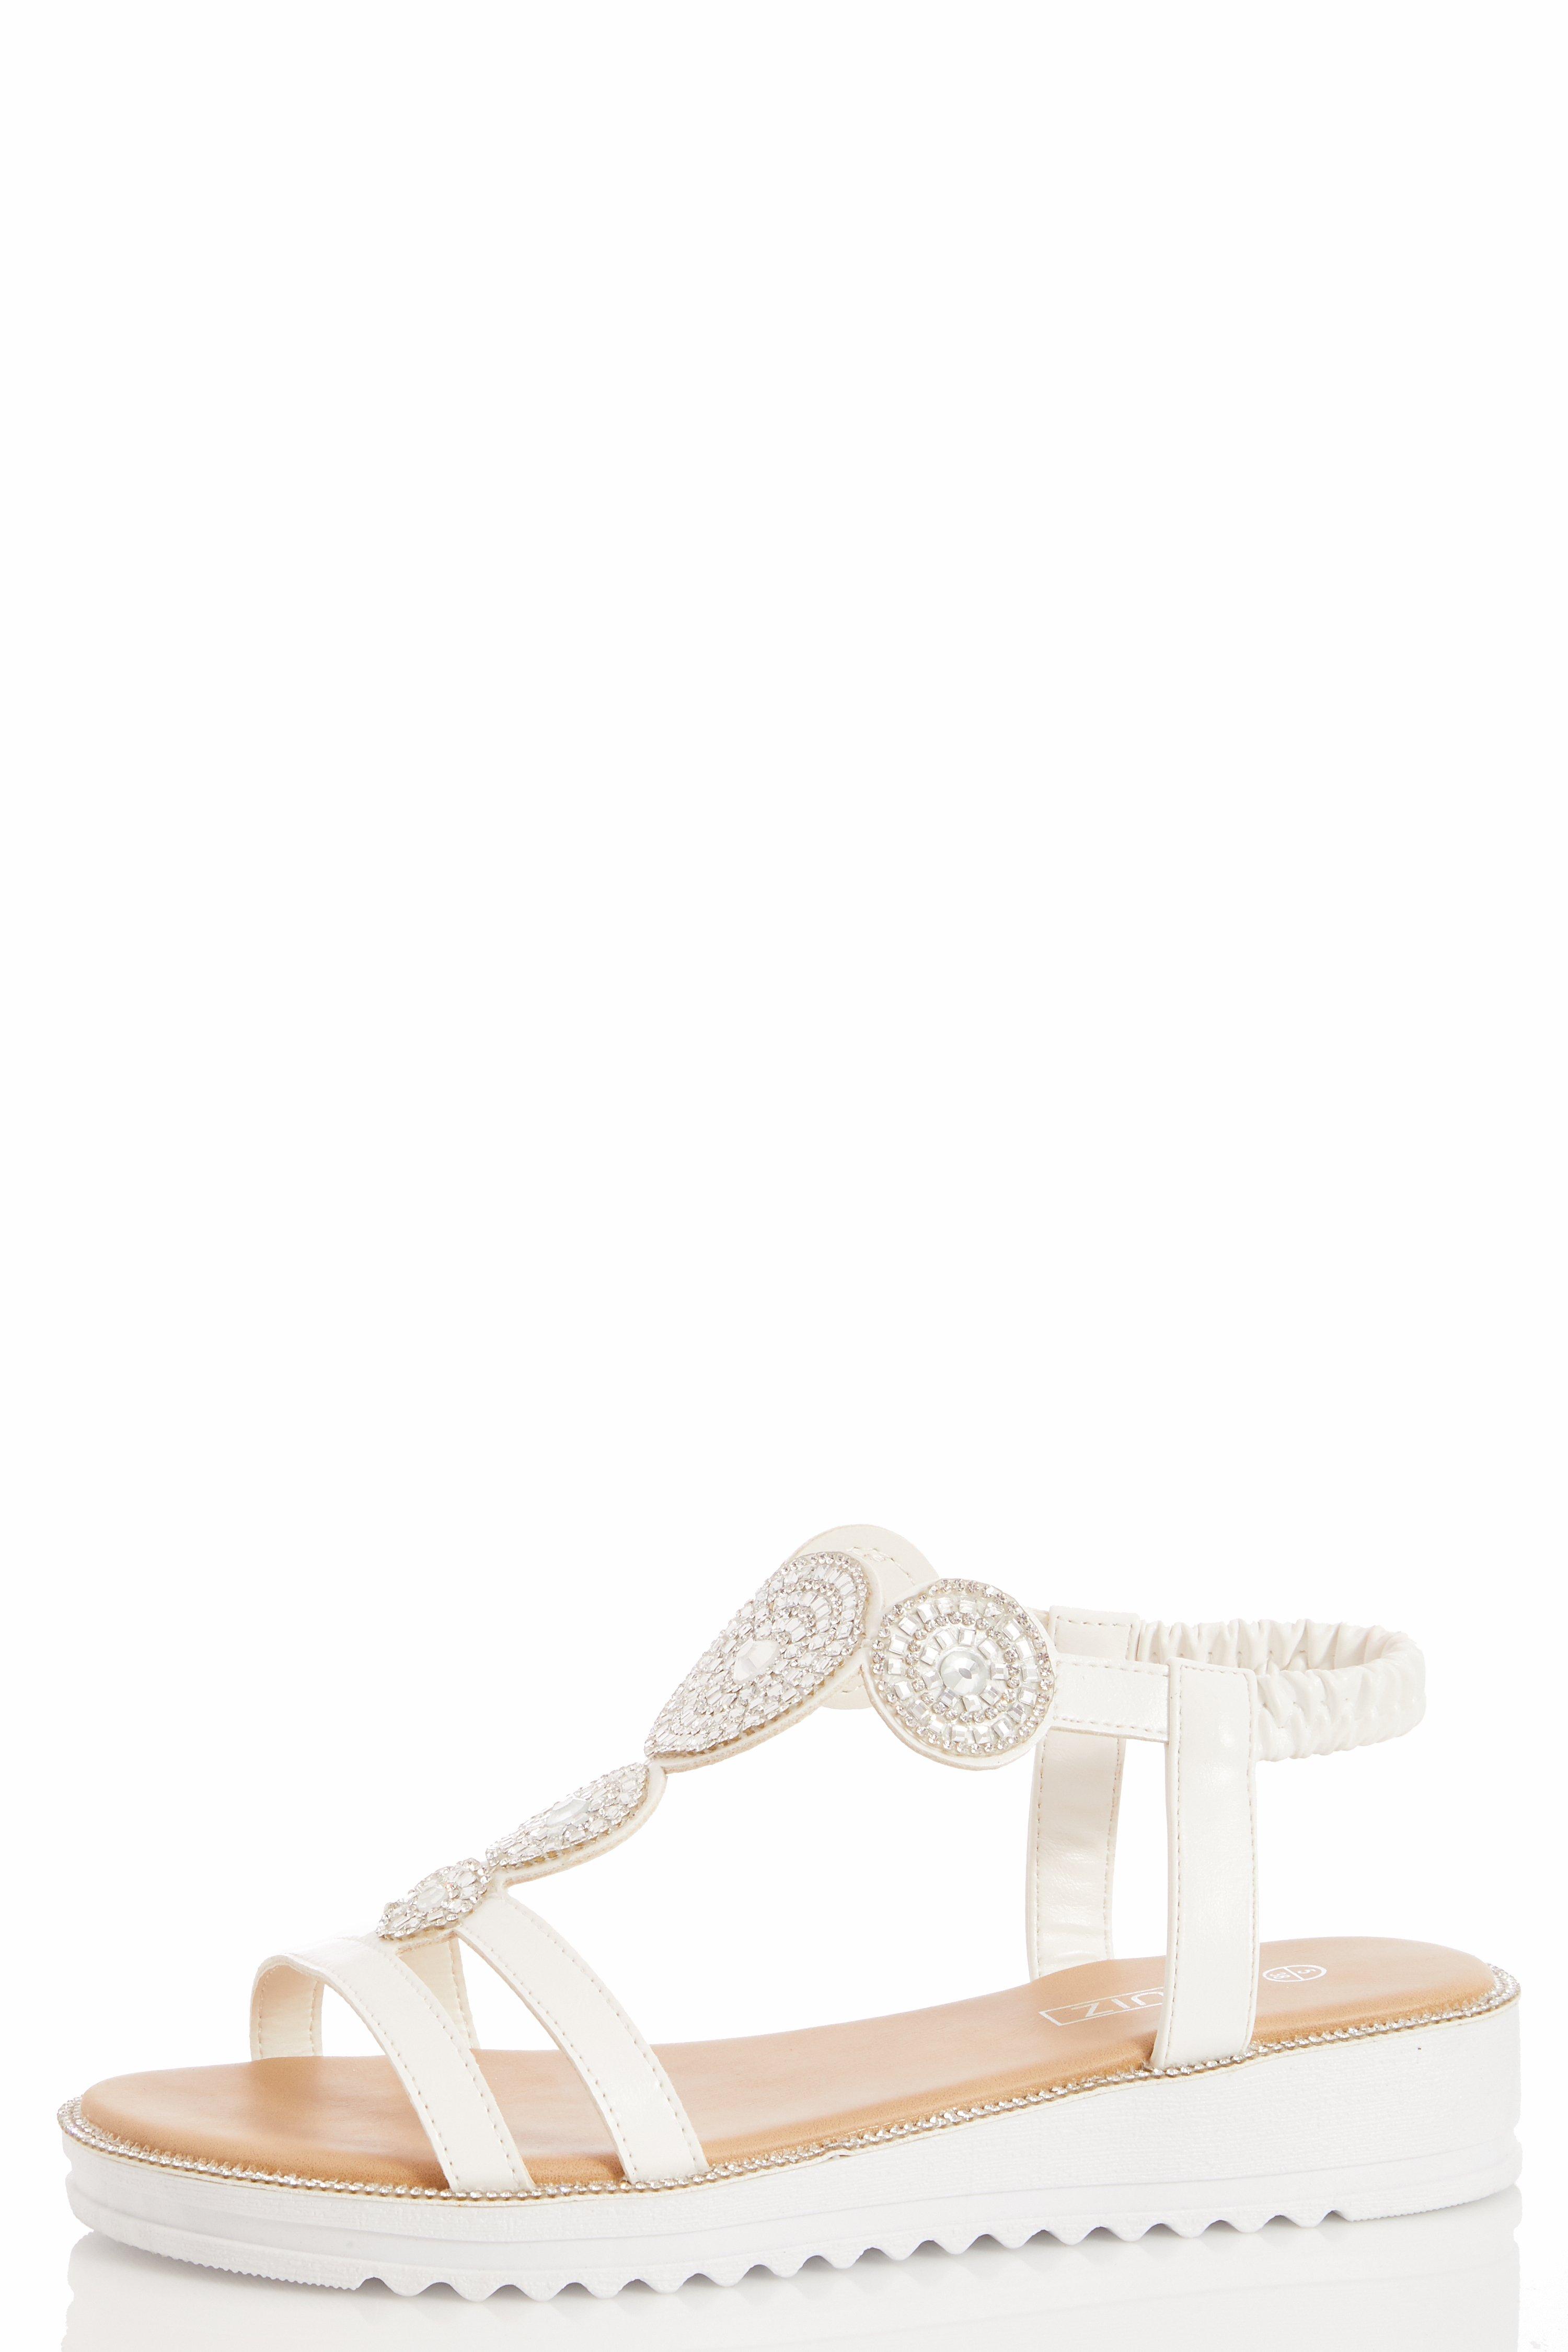 Comfort White Faux Leather Embellished Sandals - Quiz Clothing